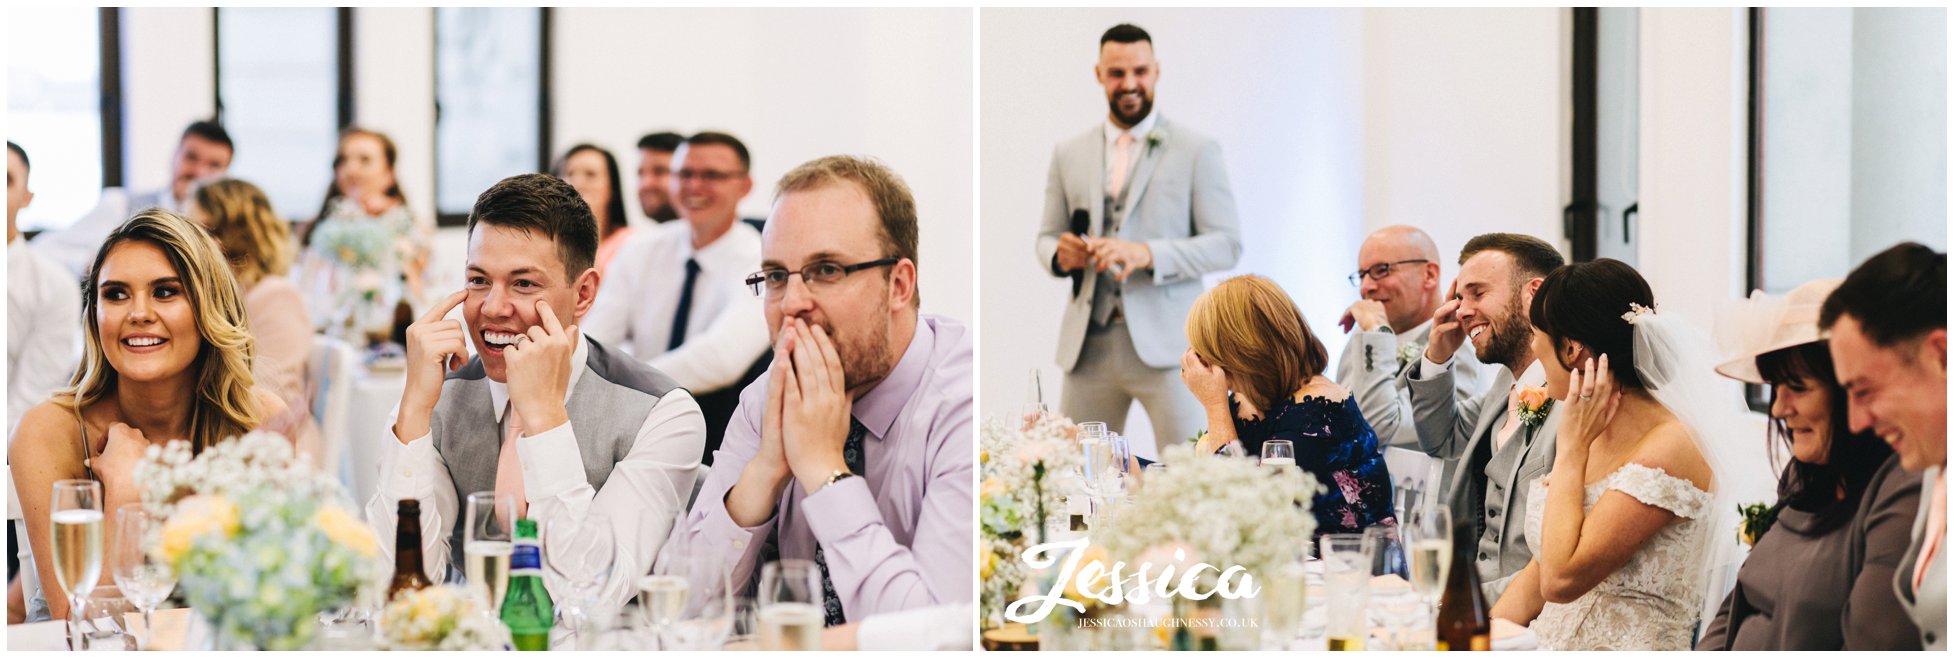 best man stands to do his speech as the groom cringes 